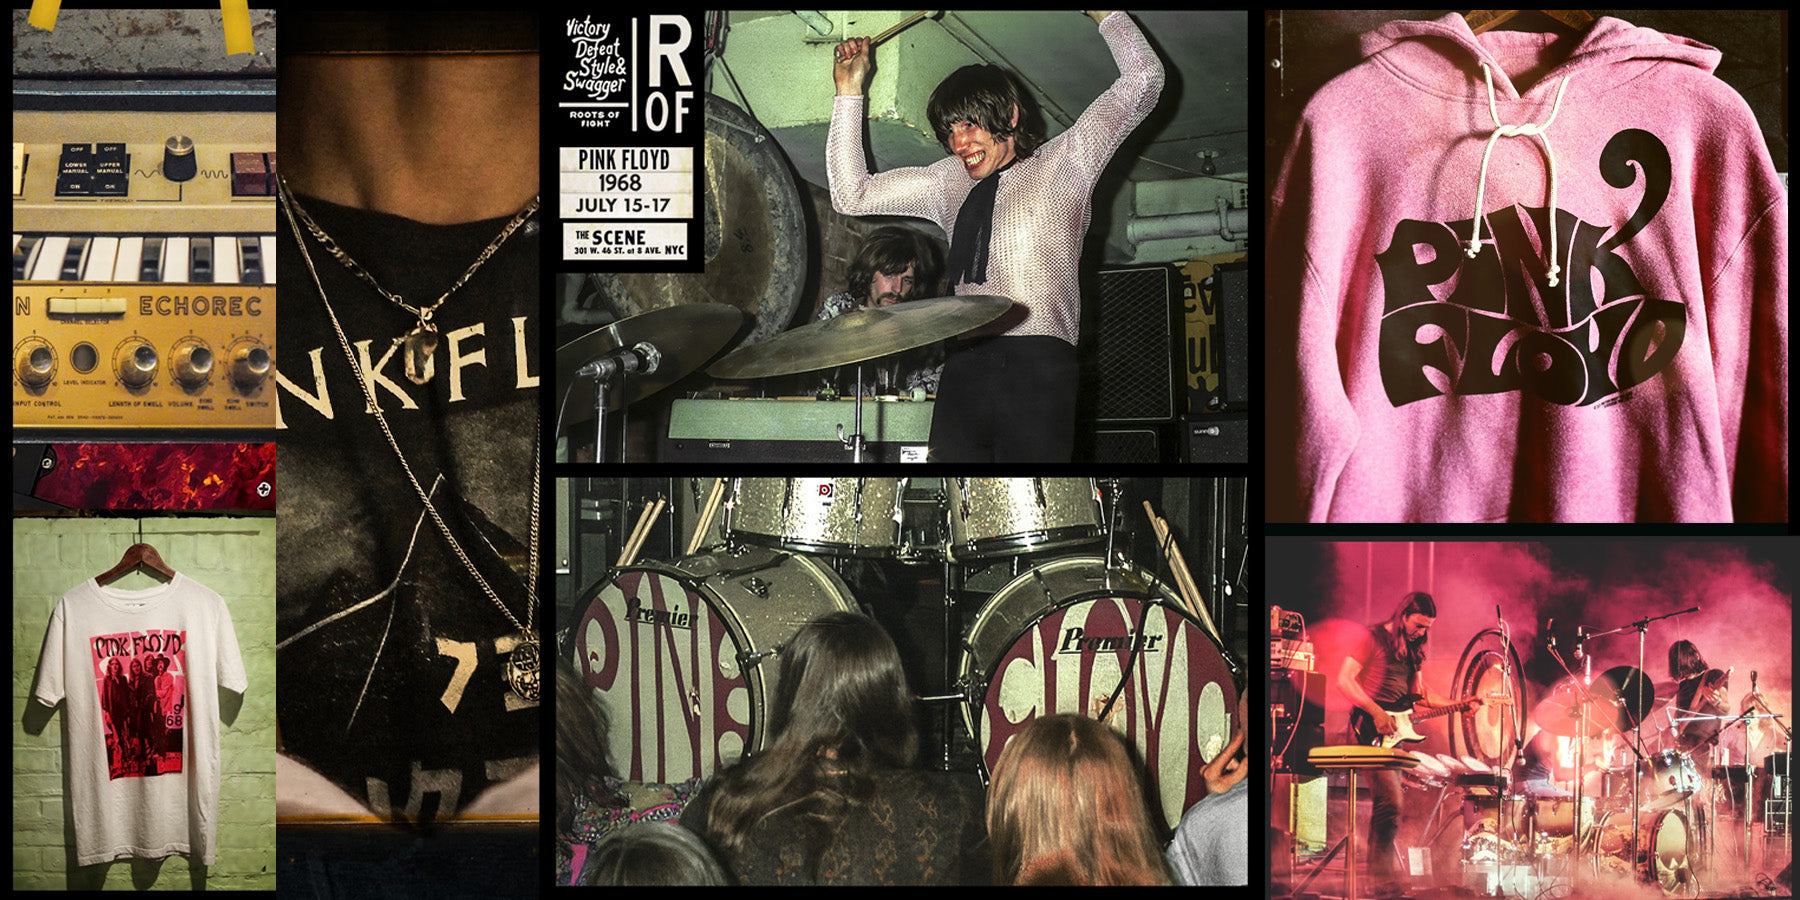 Collage of musical equipment, memorabilia, and a band performing live, related to Pink Floyd.